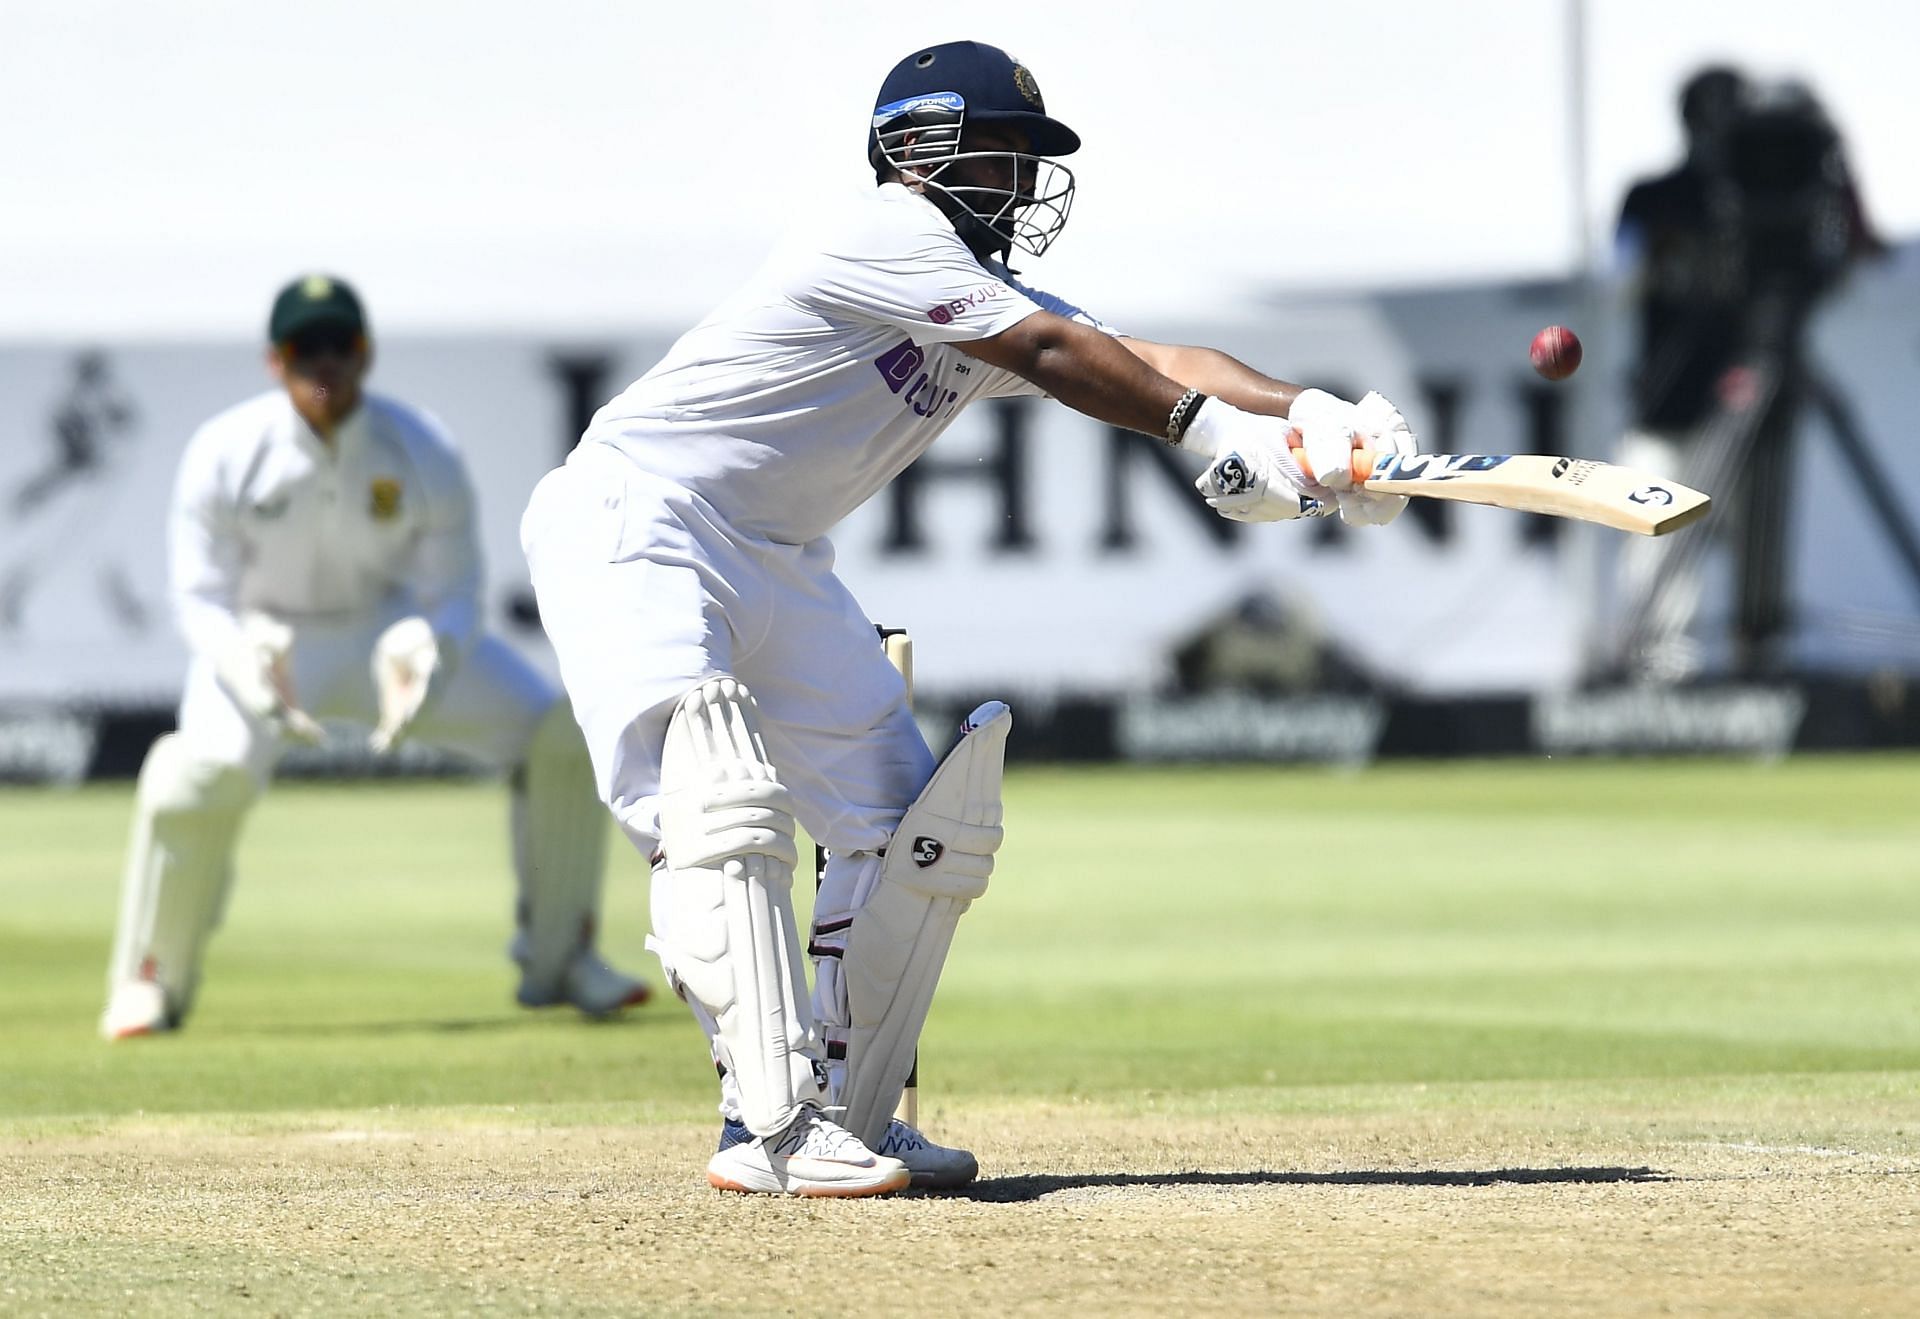 Rishabh Pant batting during Day 3 of the Cape Town Test. Pic: Getty Images